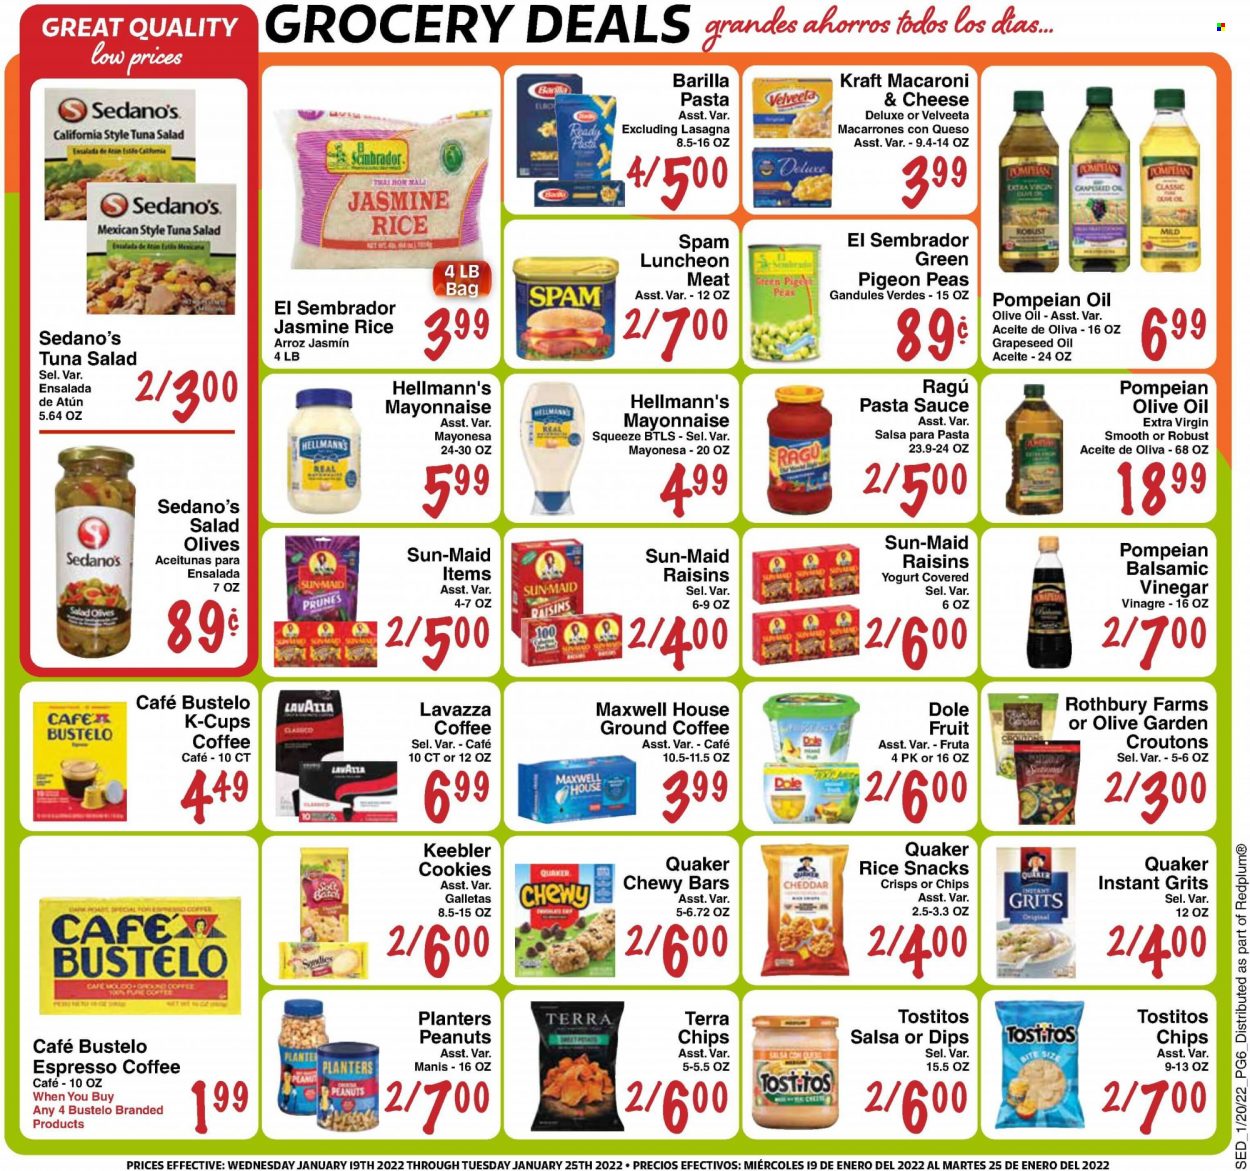 thumbnail - Sedano's Flyer - 01/19/2022 - 01/25/2022 - Sales products - peas, salad, Dole, tuna, macaroni & cheese, pasta sauce, sauce, Barilla, Quaker, Kraft®, ragú pasta, tuna salad, Spam, lunch meat, yoghurt, mayonnaise, Hellmann’s, cookies, snack, Keebler, chips, Tostitos, croutons, grits, olives, rice, jasmine rice, toor dal, salsa, ragu, extra virgin olive oil, olive oil, oil, grape seed oil, raisins, prunes, peanuts, dried fruit, Planters, Maxwell House, coffee, ground coffee, coffee capsules, K-Cups, Lavazza. Page 6.